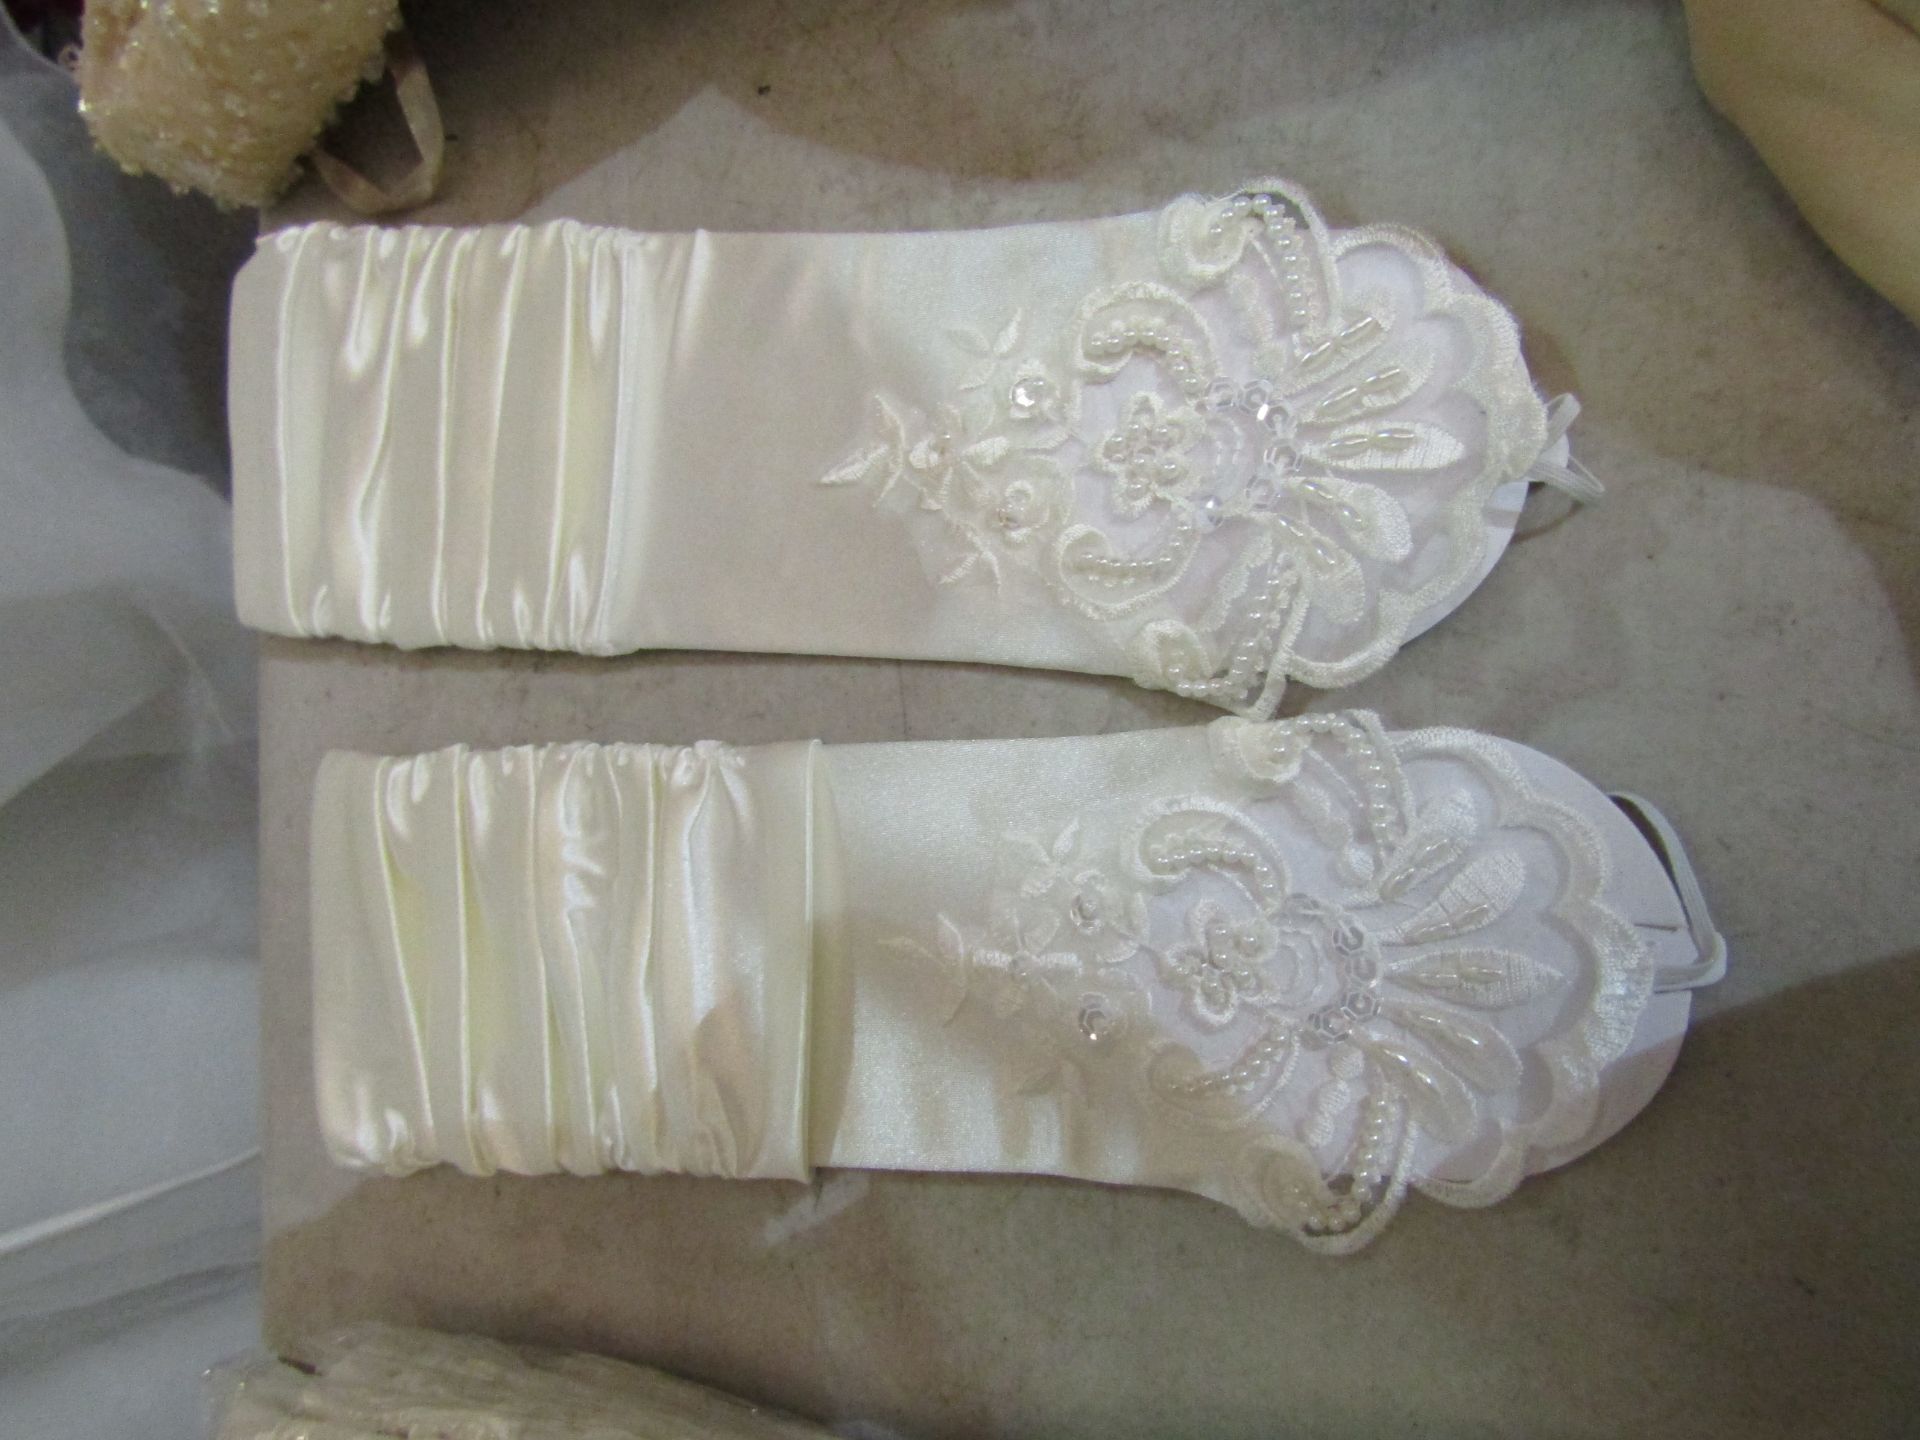 Approx 500 pieces of wedding shop stock to include wedding dresses, mother of the bride, dresses, - Image 23 of 108